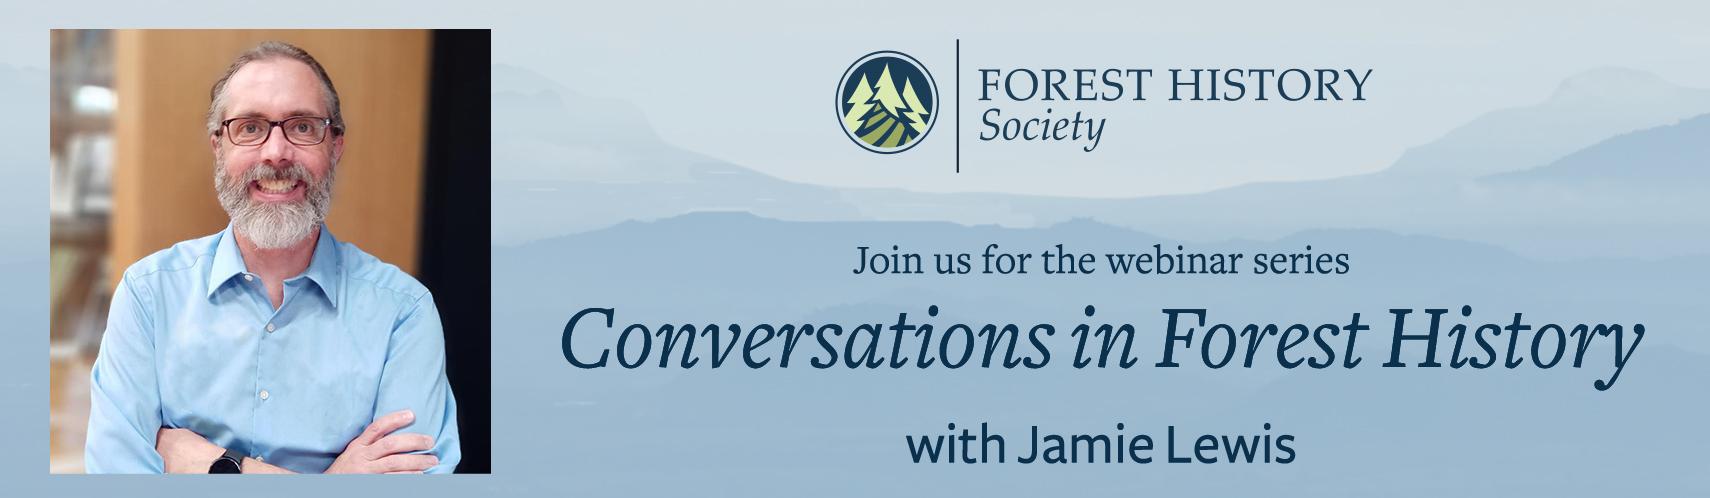 Conversations banner with Jamie